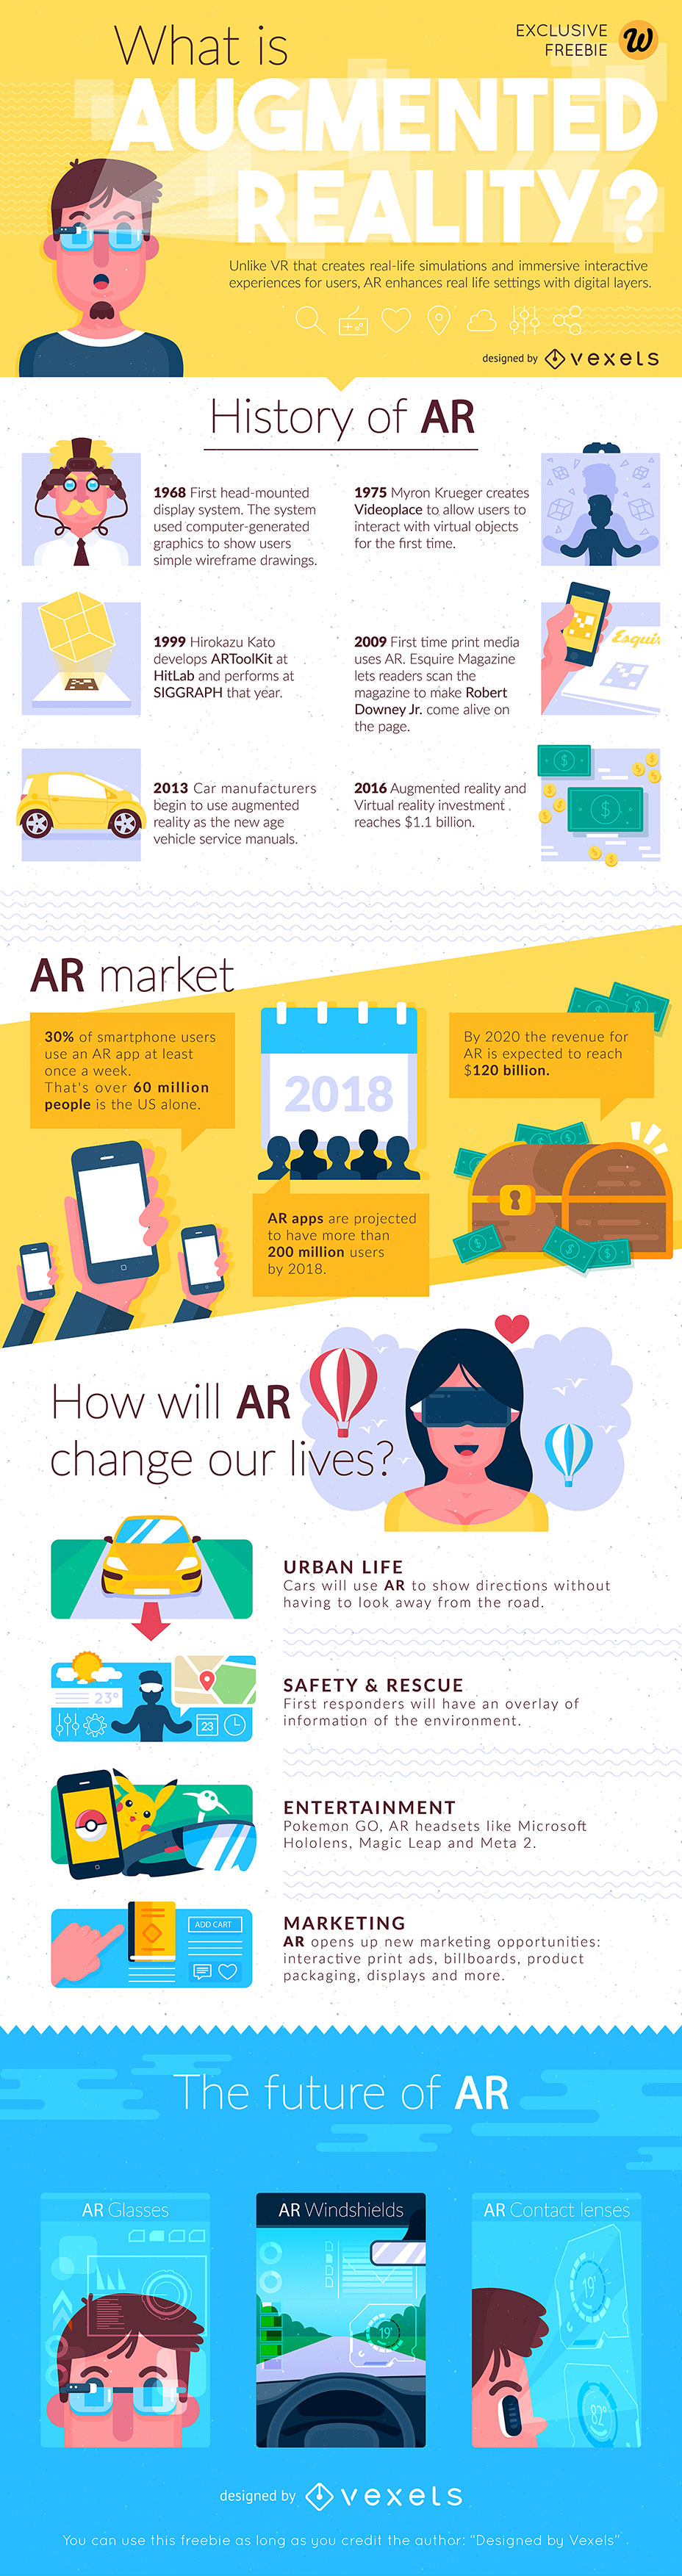 Opportunities for Augmented Reality in 2018